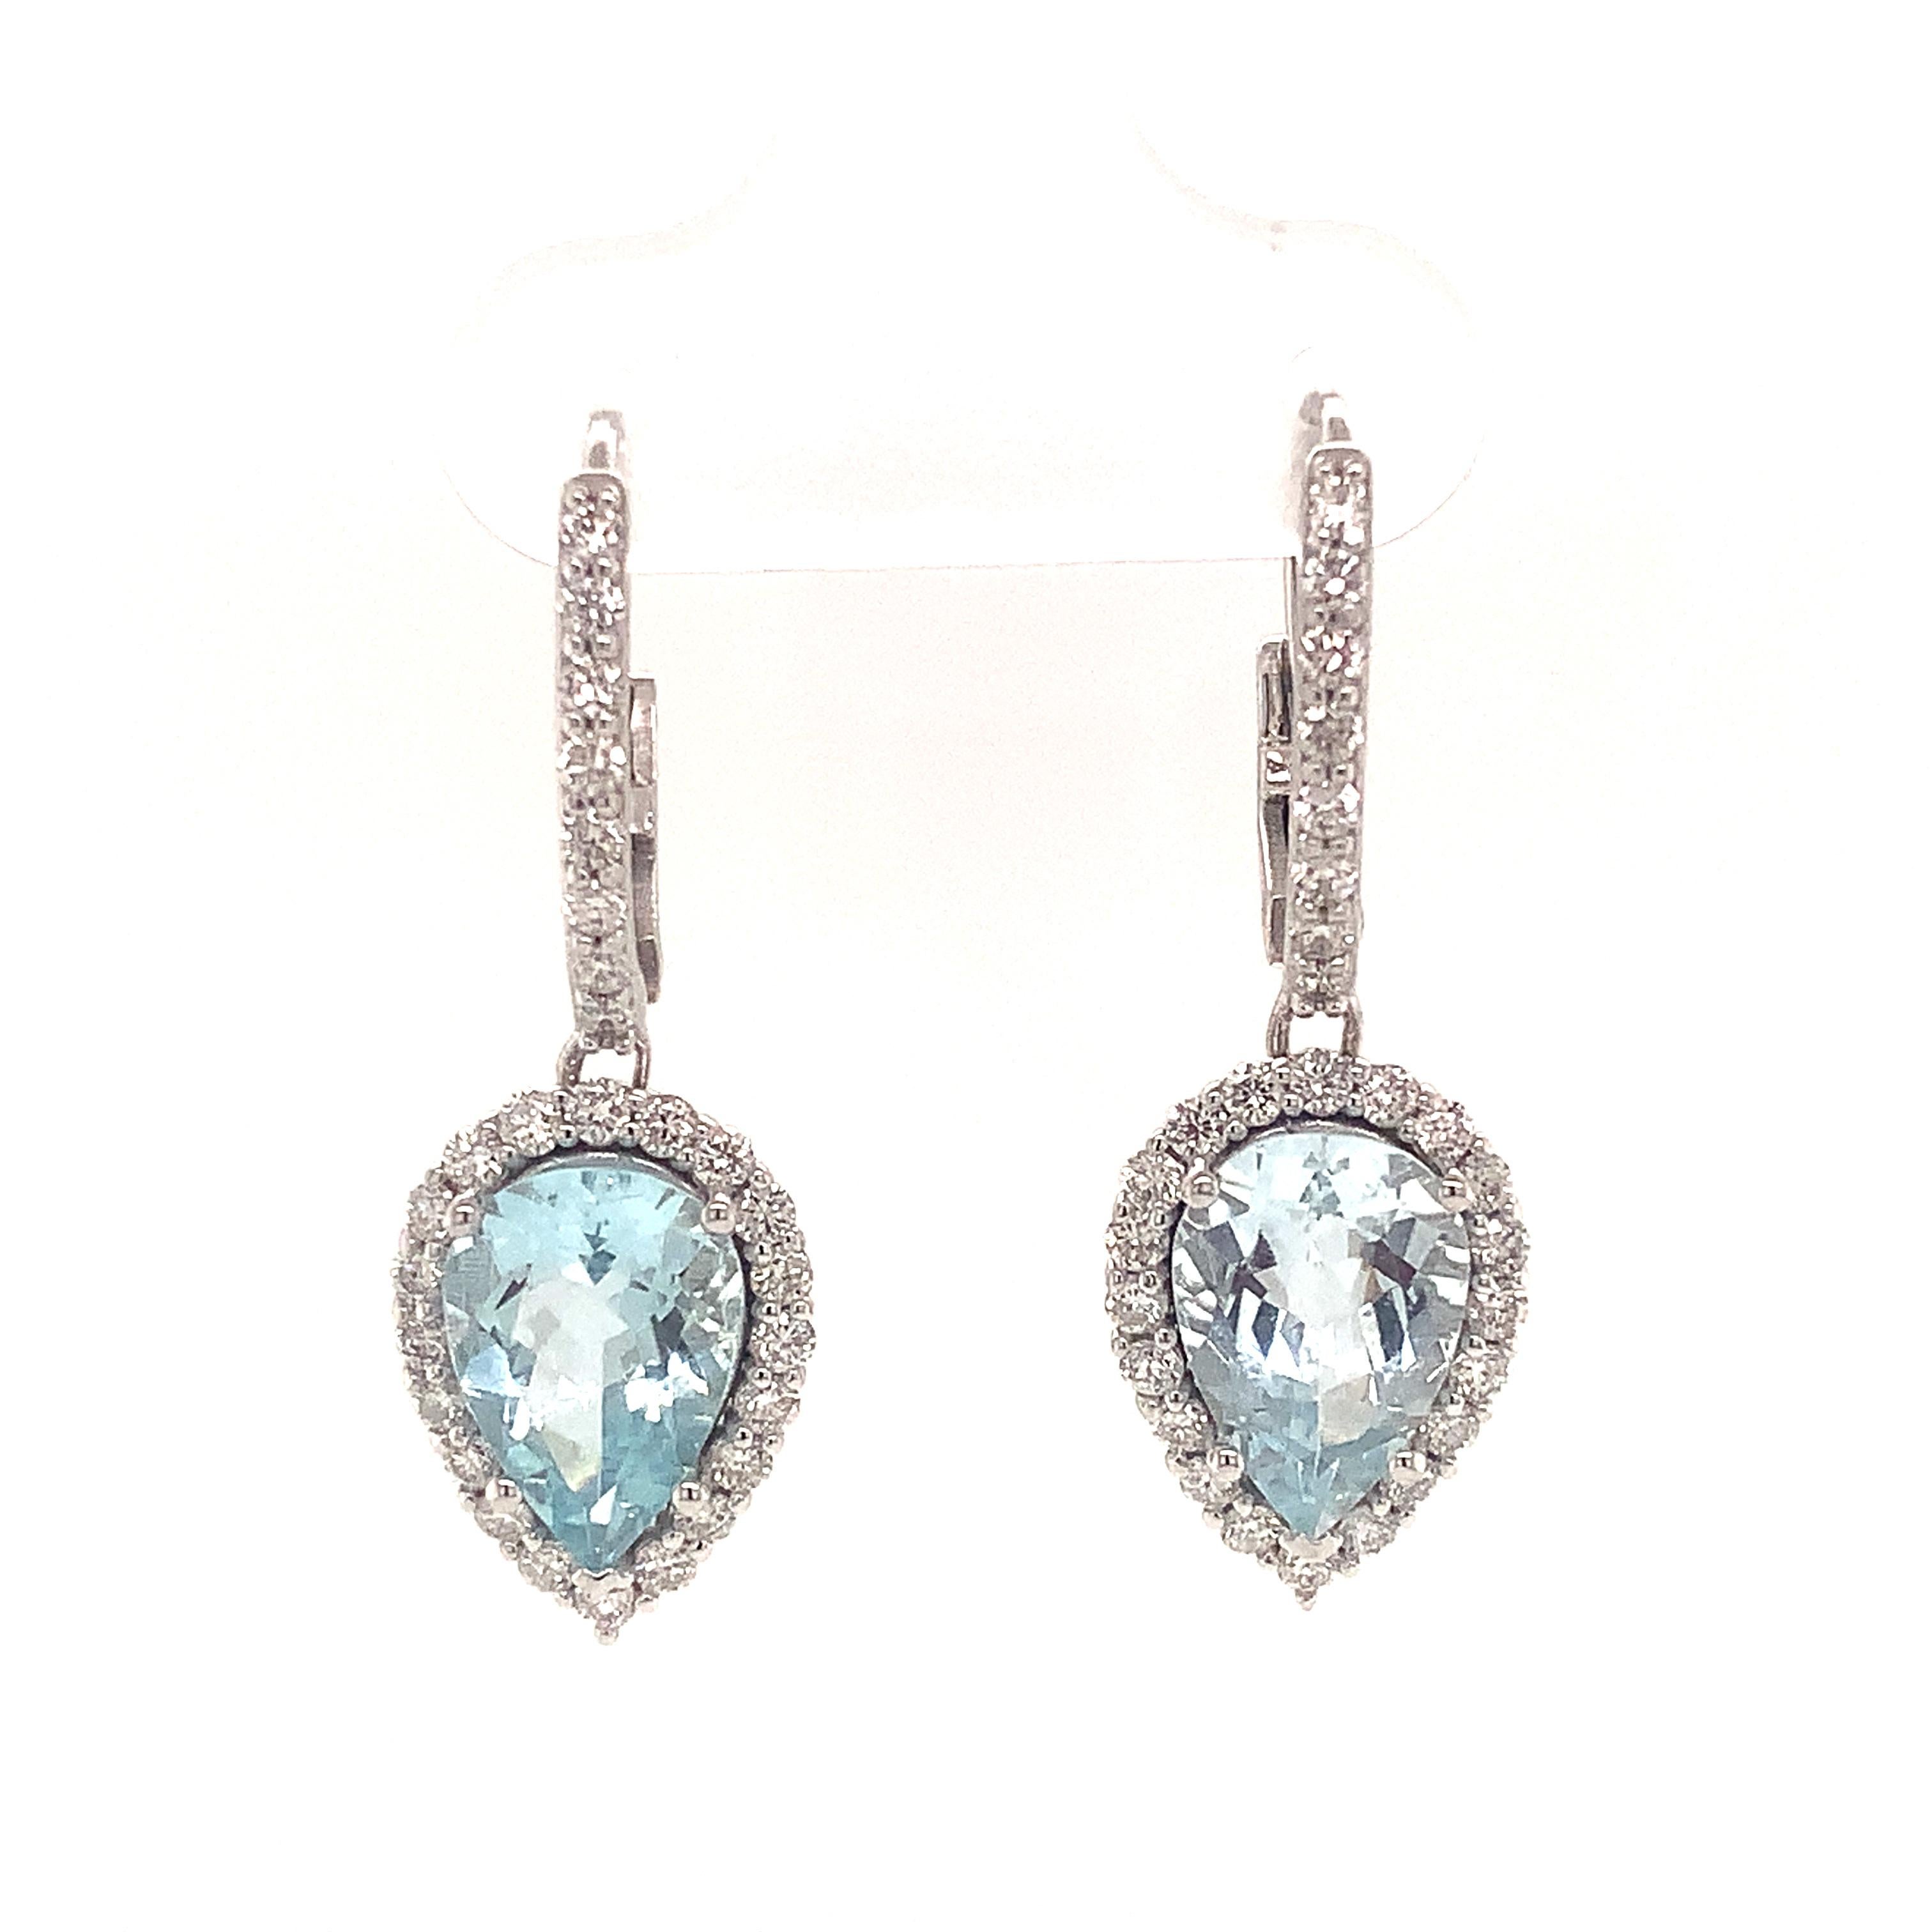 Natural Aquamarine Diamond Earrings 14k Gold 3.61 Tcw Certified For Sale 5